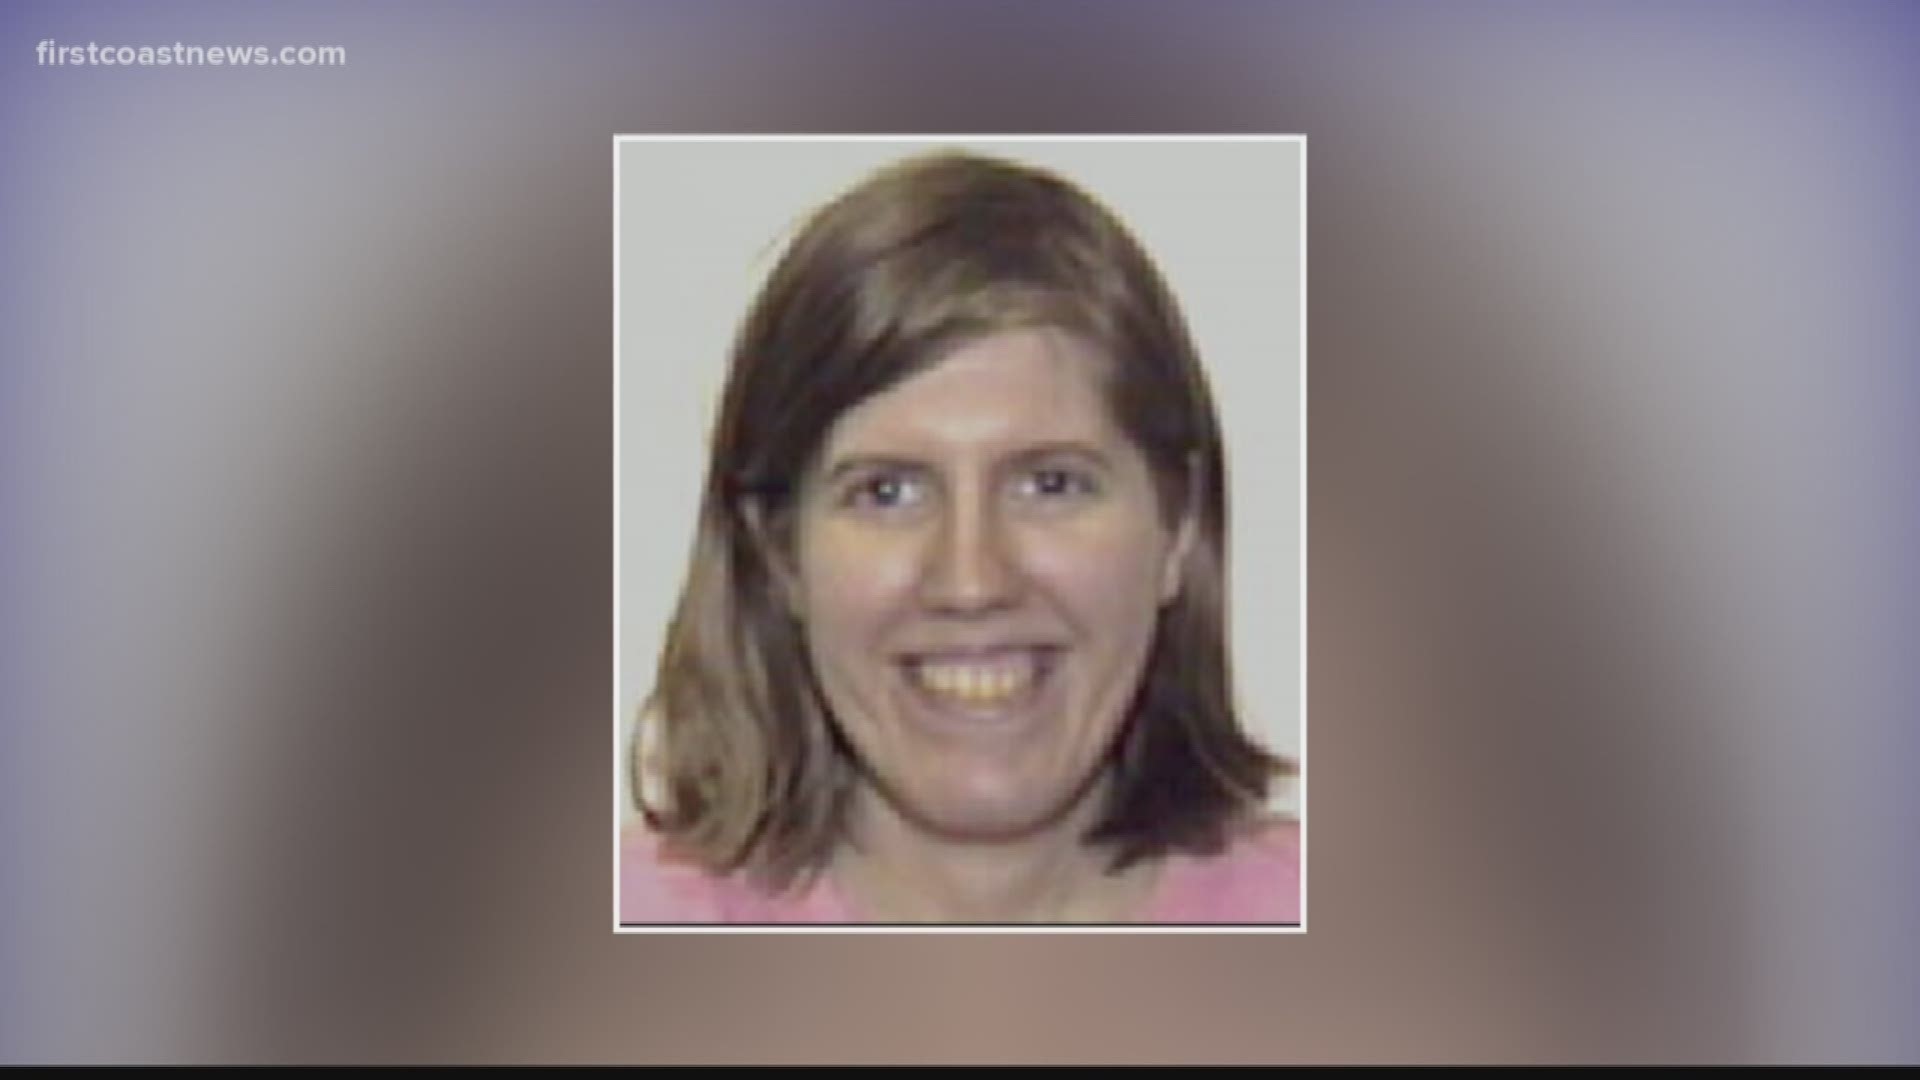 The Jacksonville Sheriff's Office safely located 41-year-old Stacey Lynn Talmadge Wednesday.